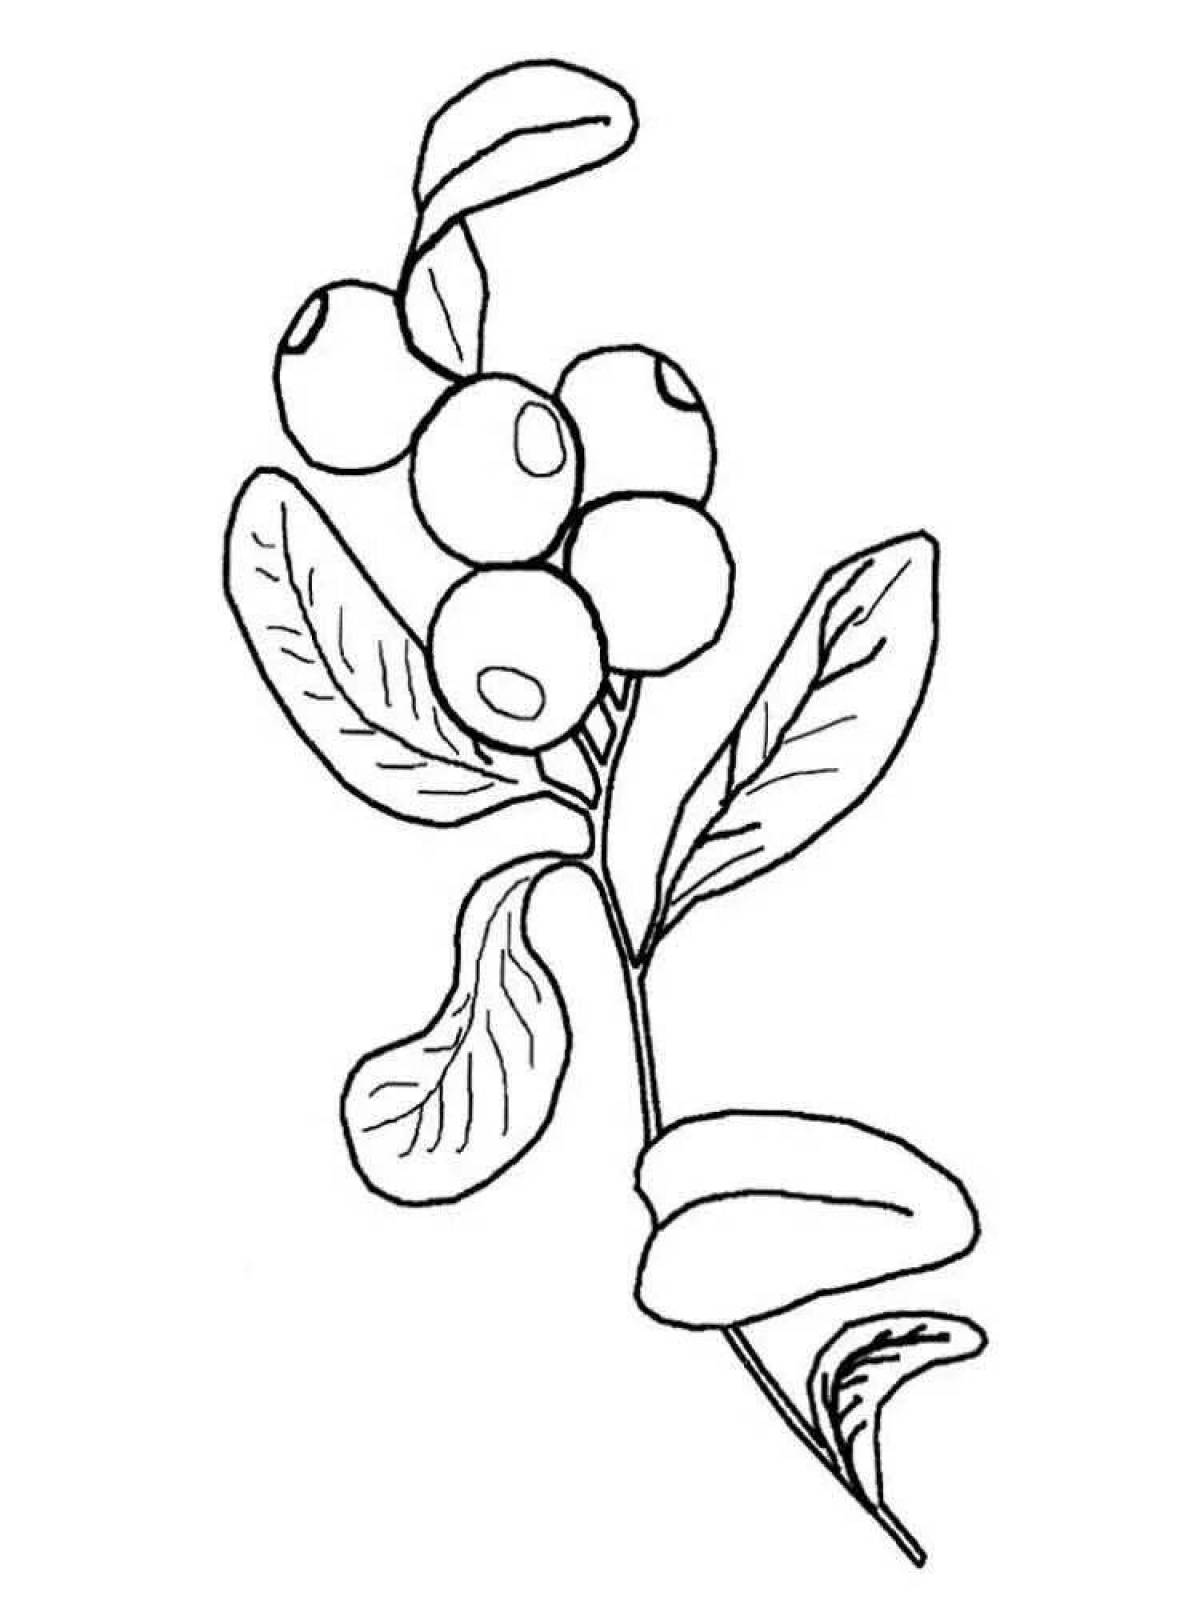 Cute blueberry coloring book